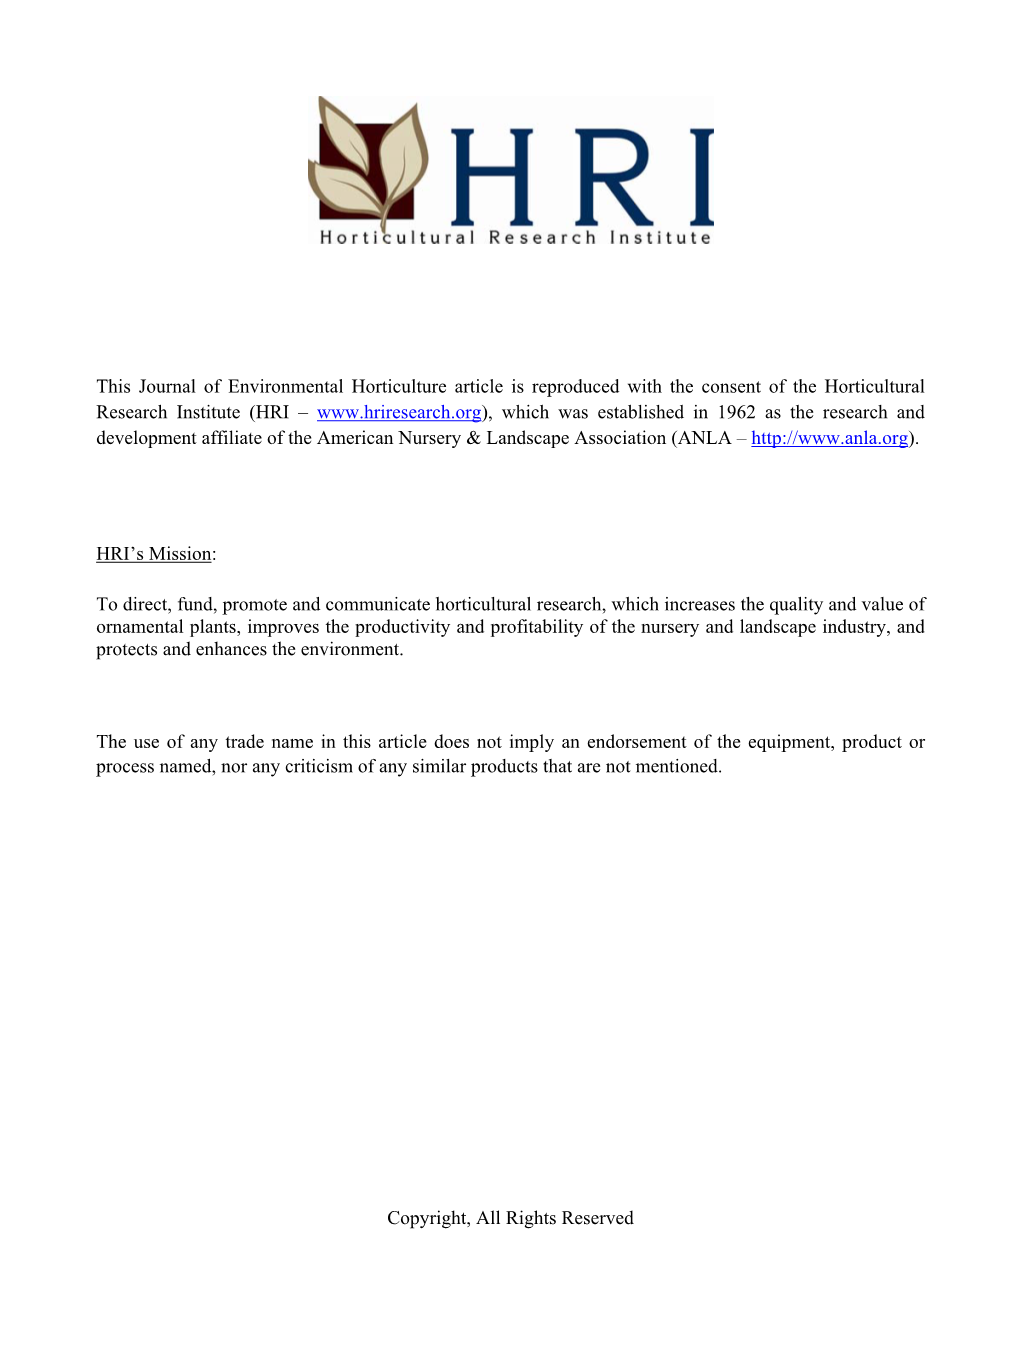 This Journal of Environmental Horticulture Article Is Reproduced with the Consent of the Horticultural Research Institute (HRI